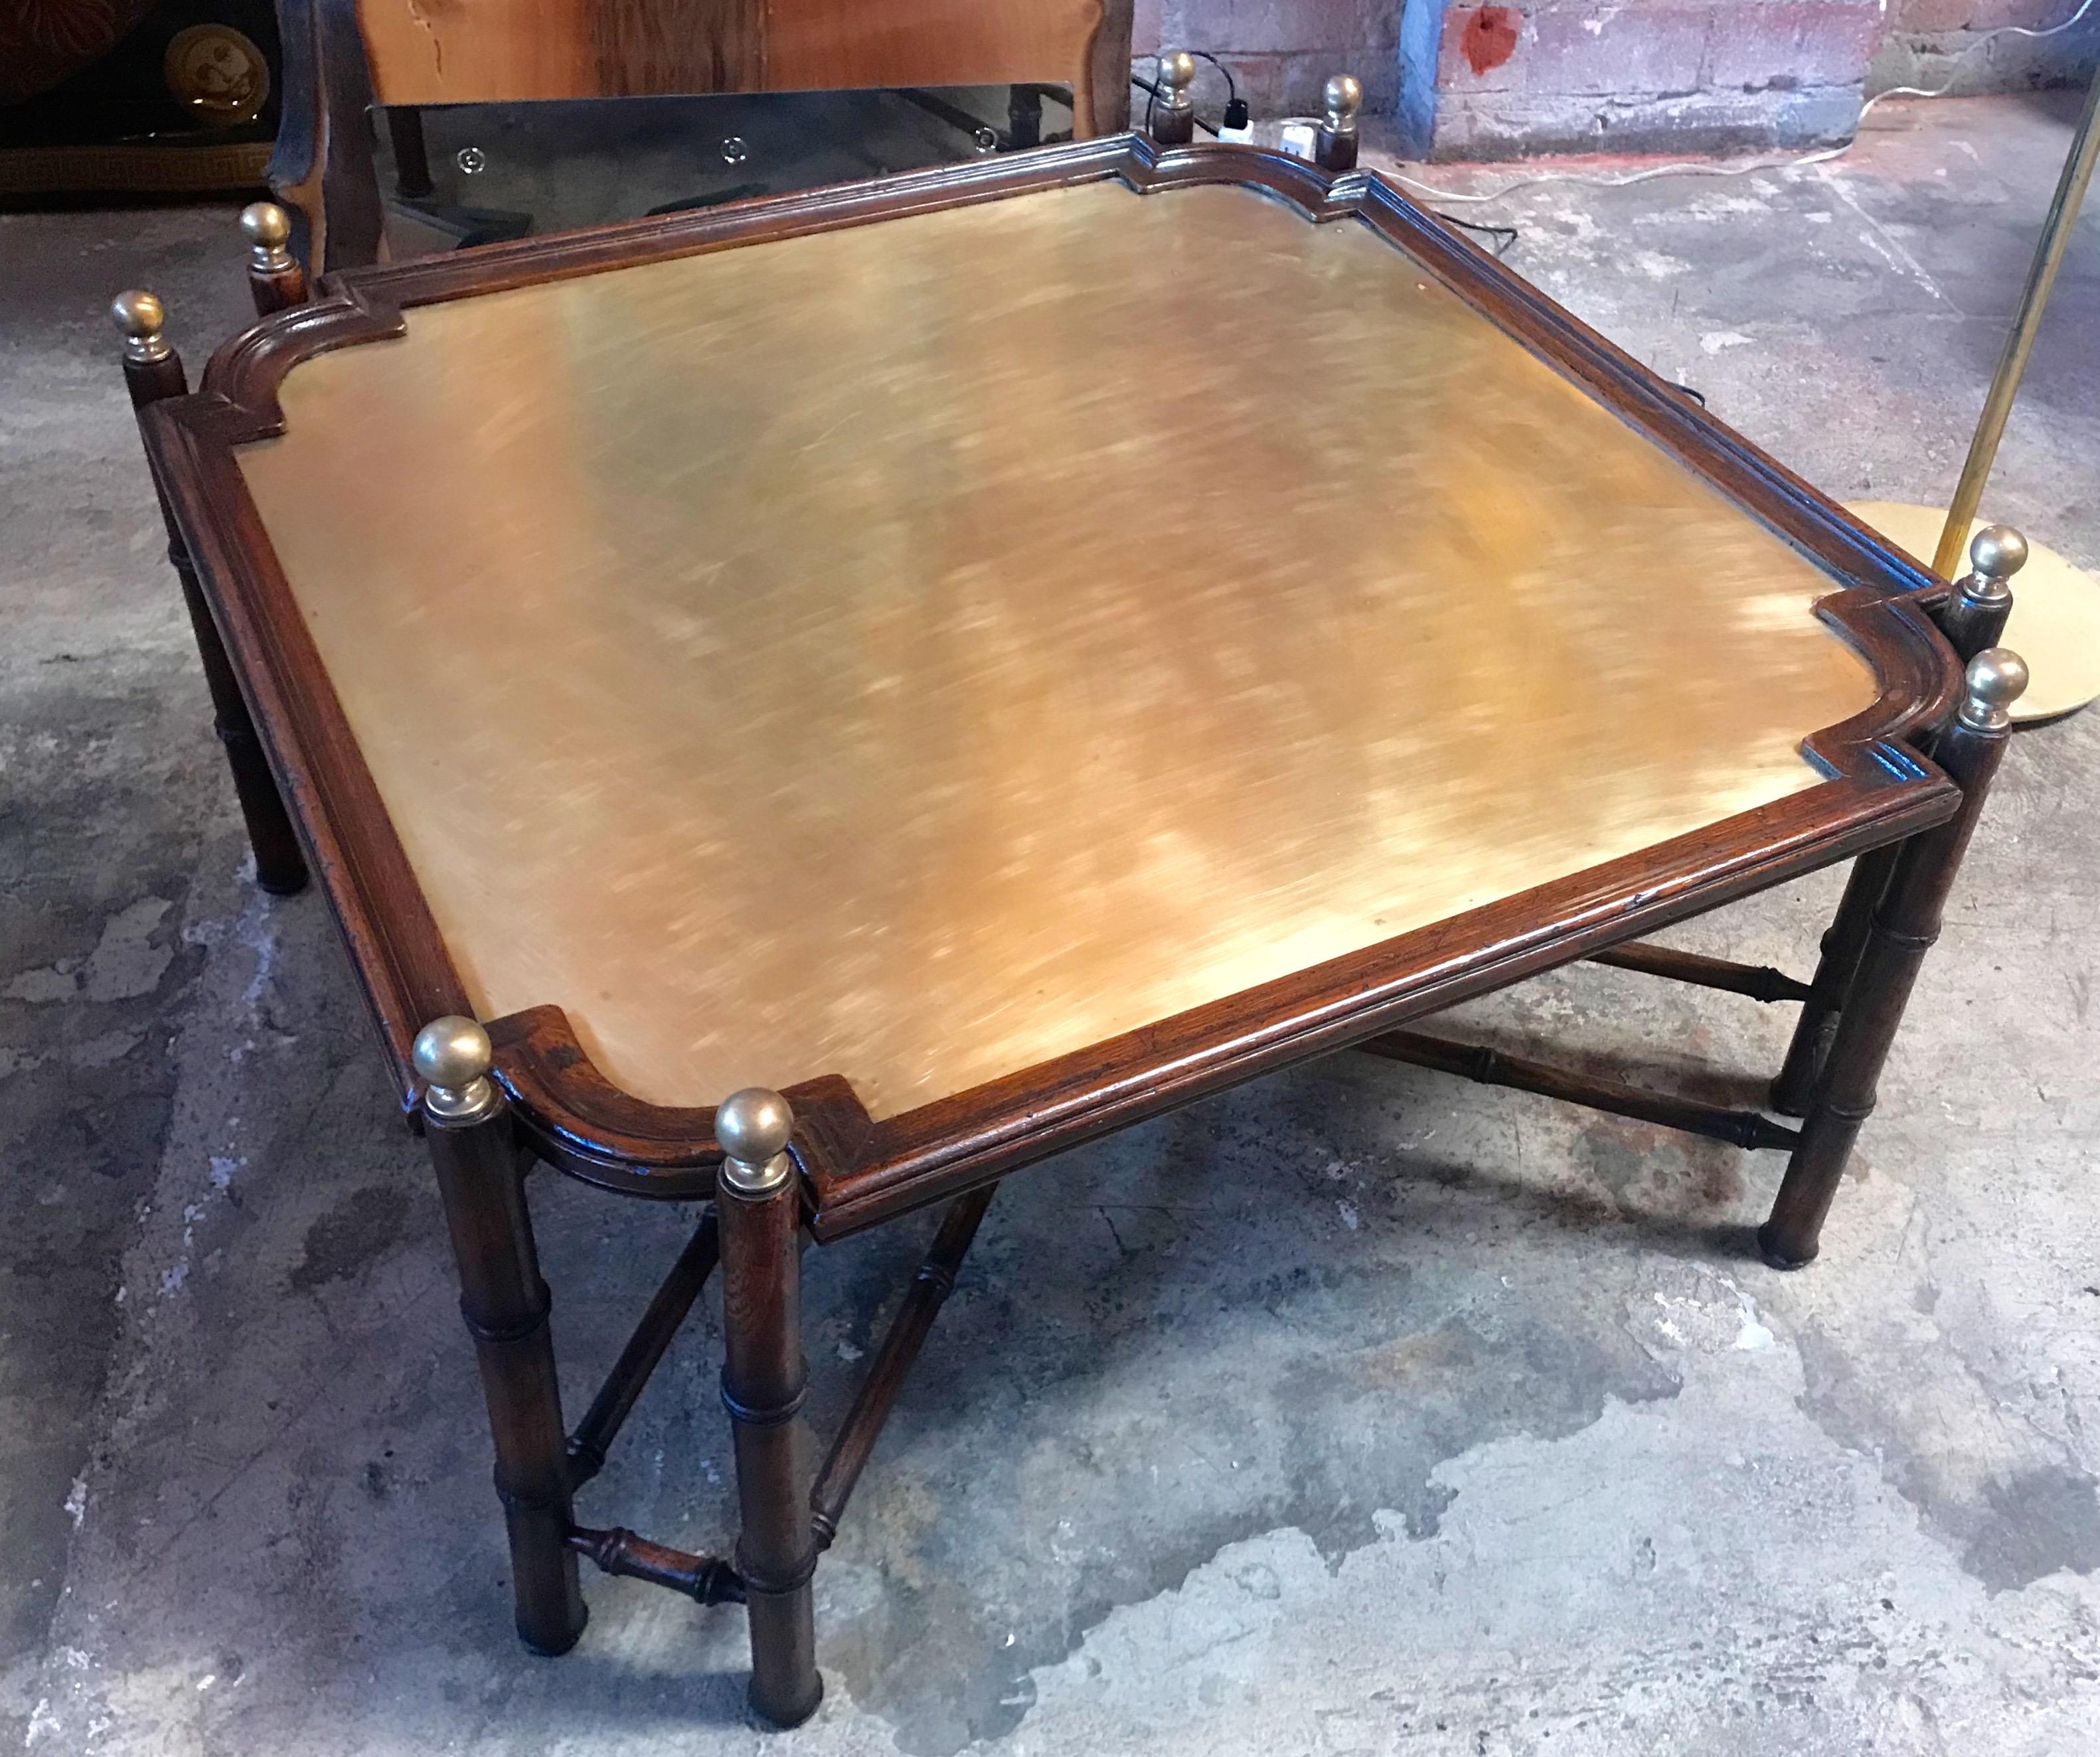 Large vintage coffee table of faux bamboo form wood base and removable tray top having a distinctive patinated brass top. This cocktail table has classic lines and solid brass finials mount on the top corners.